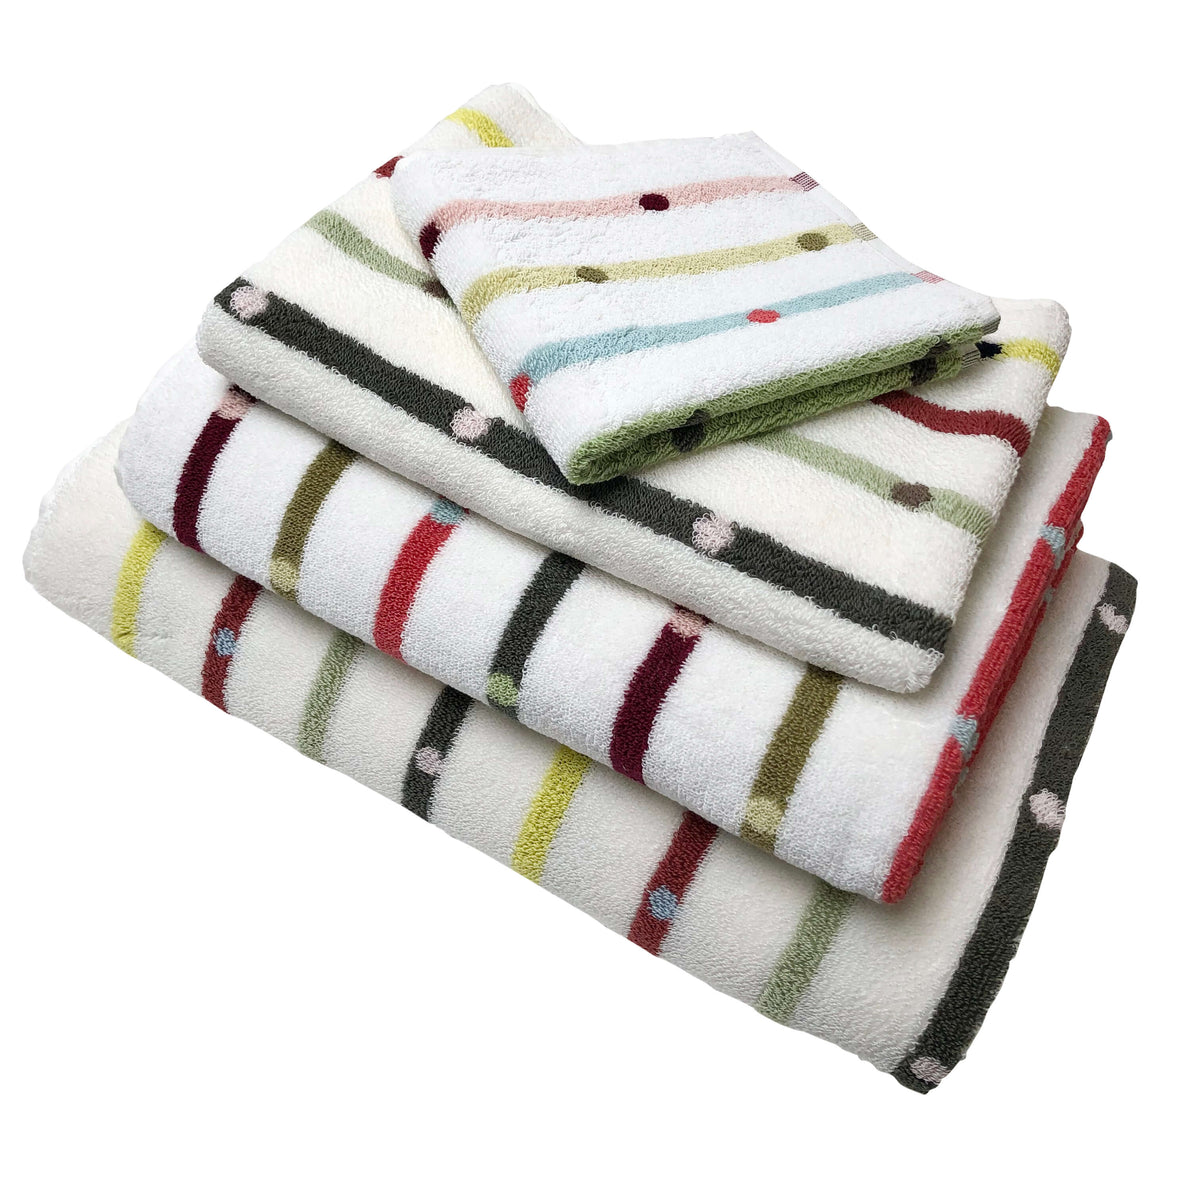 Fiorucci Verde by Turkish Towel Collection